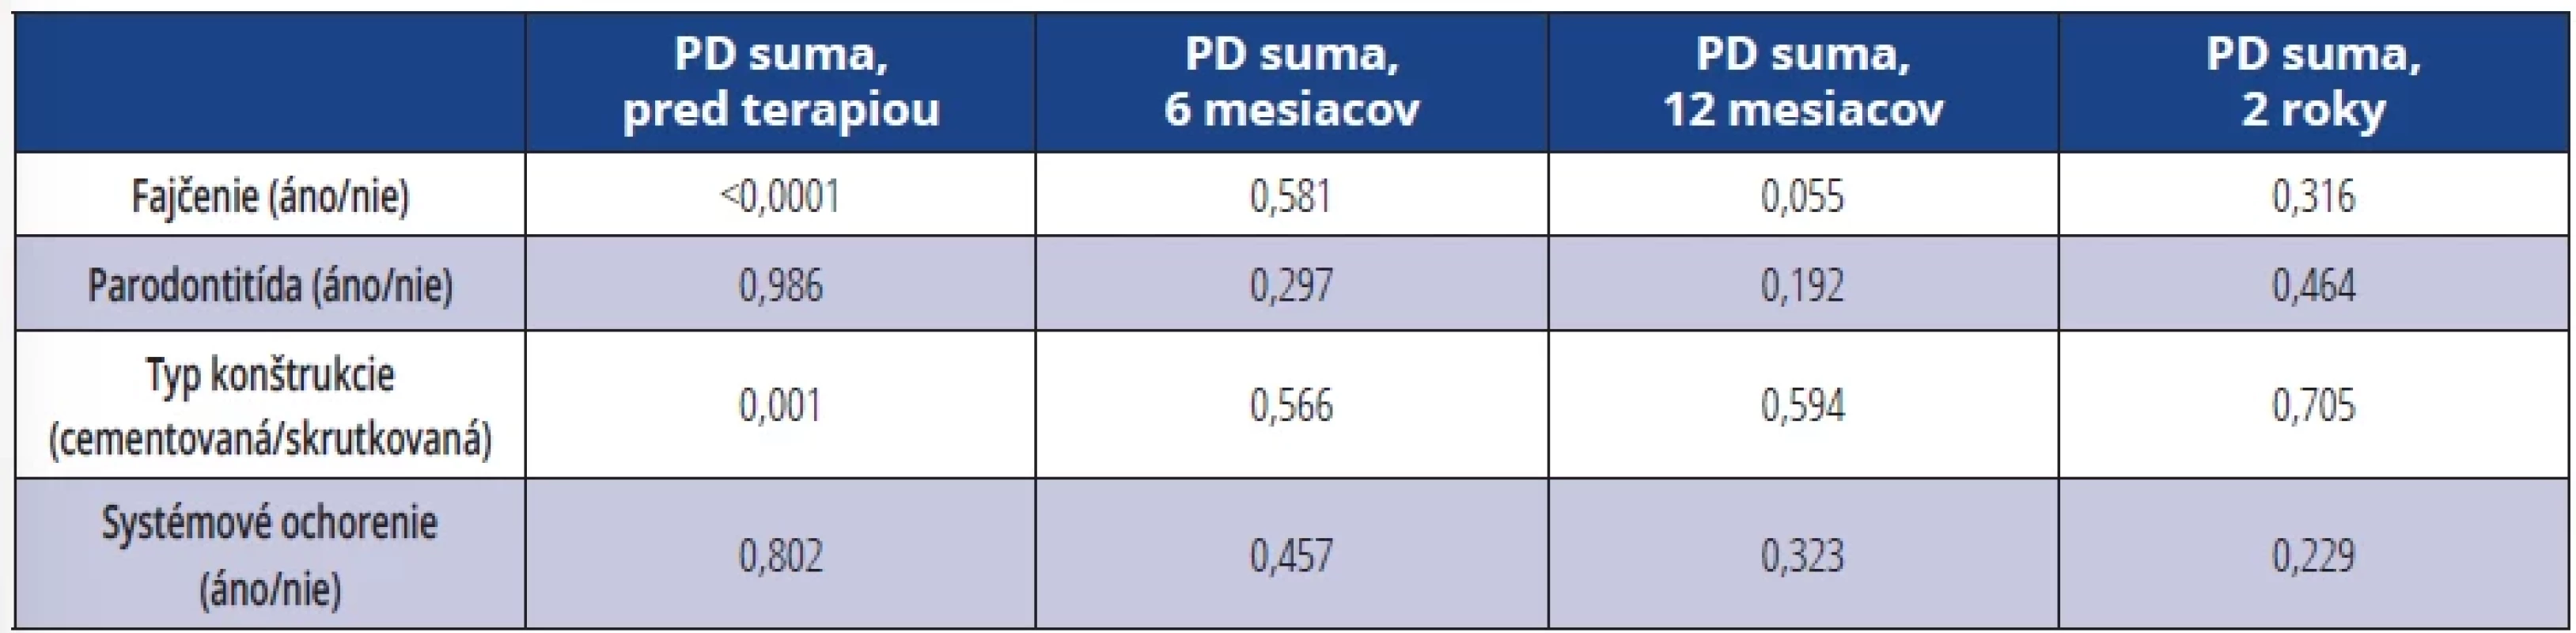 Hodnoty signifikancie pre porovnanie jednotlivých skupín v hodnotách parametra PD suma. </br>Tab. 7 Significance values for the comparison of individual groups in the values of the parameter PD sum.